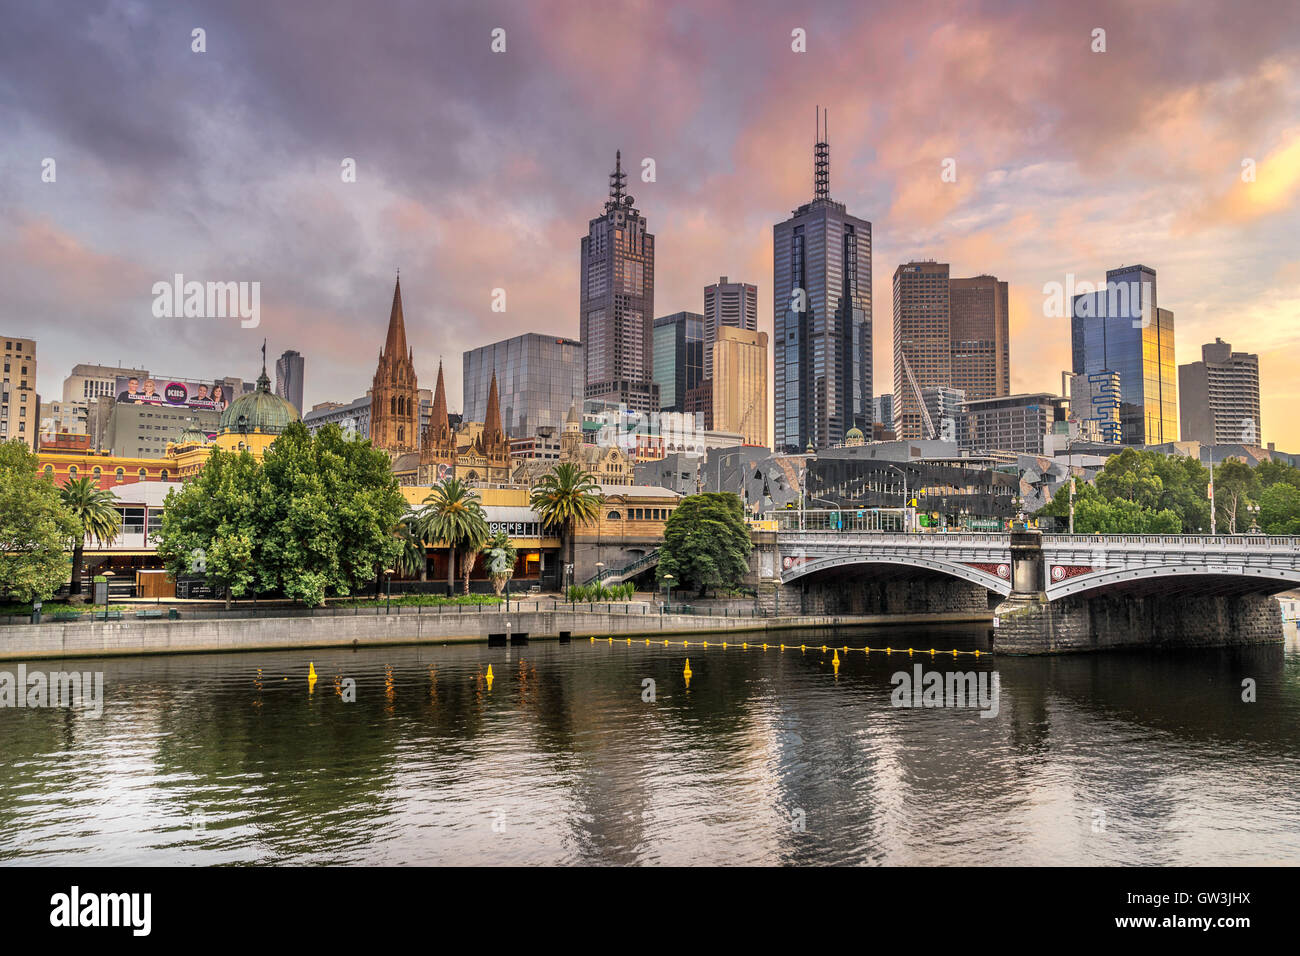 Looking across the Yarra River to the Central business district of Melbourne Stock Photo